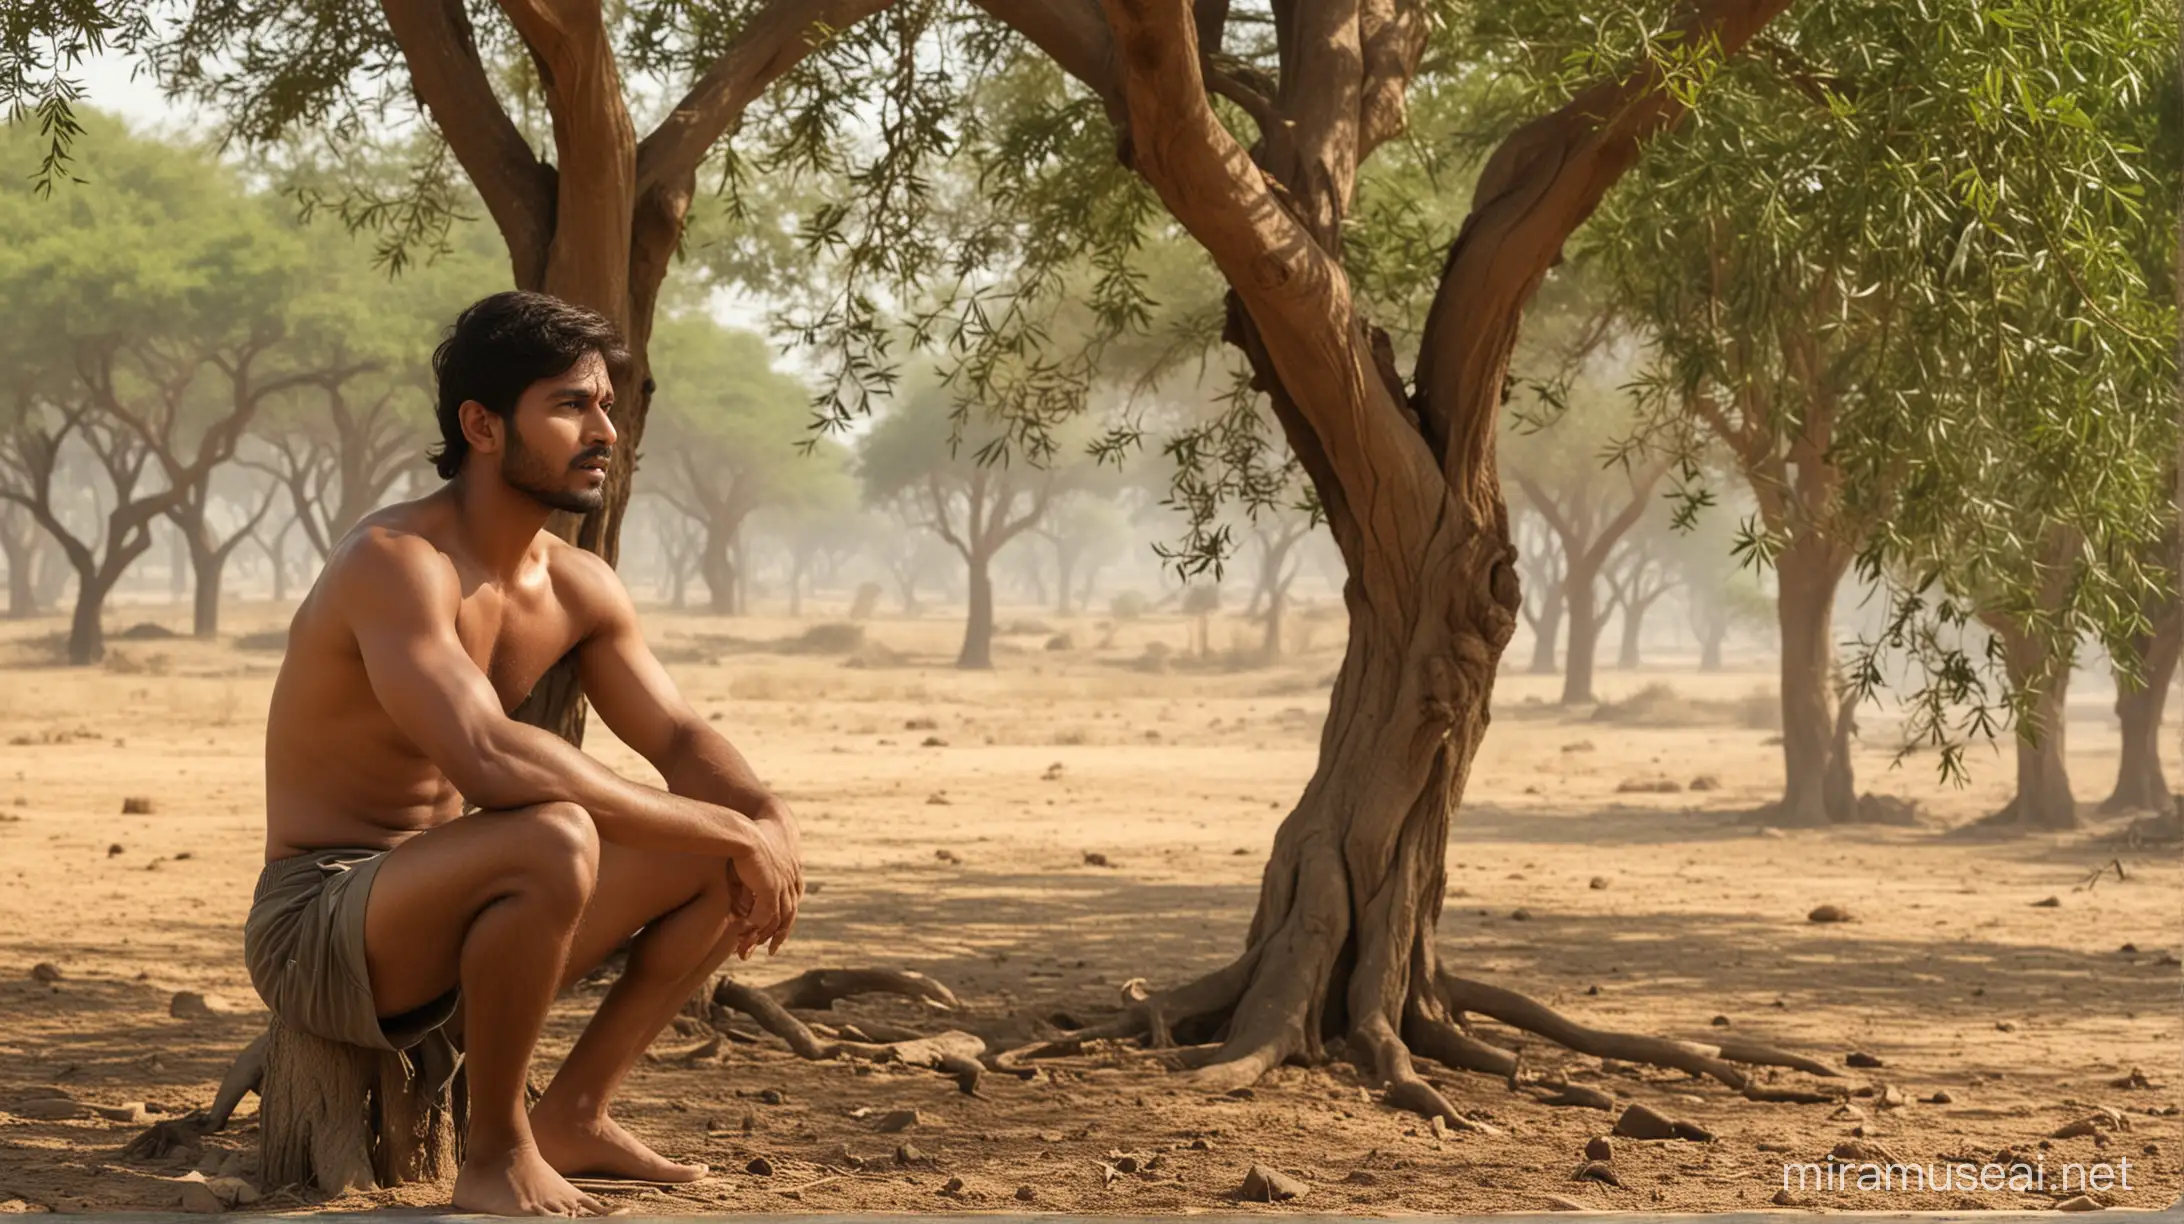 Indian Man Expressing Tension in Hot Outdoor Setting